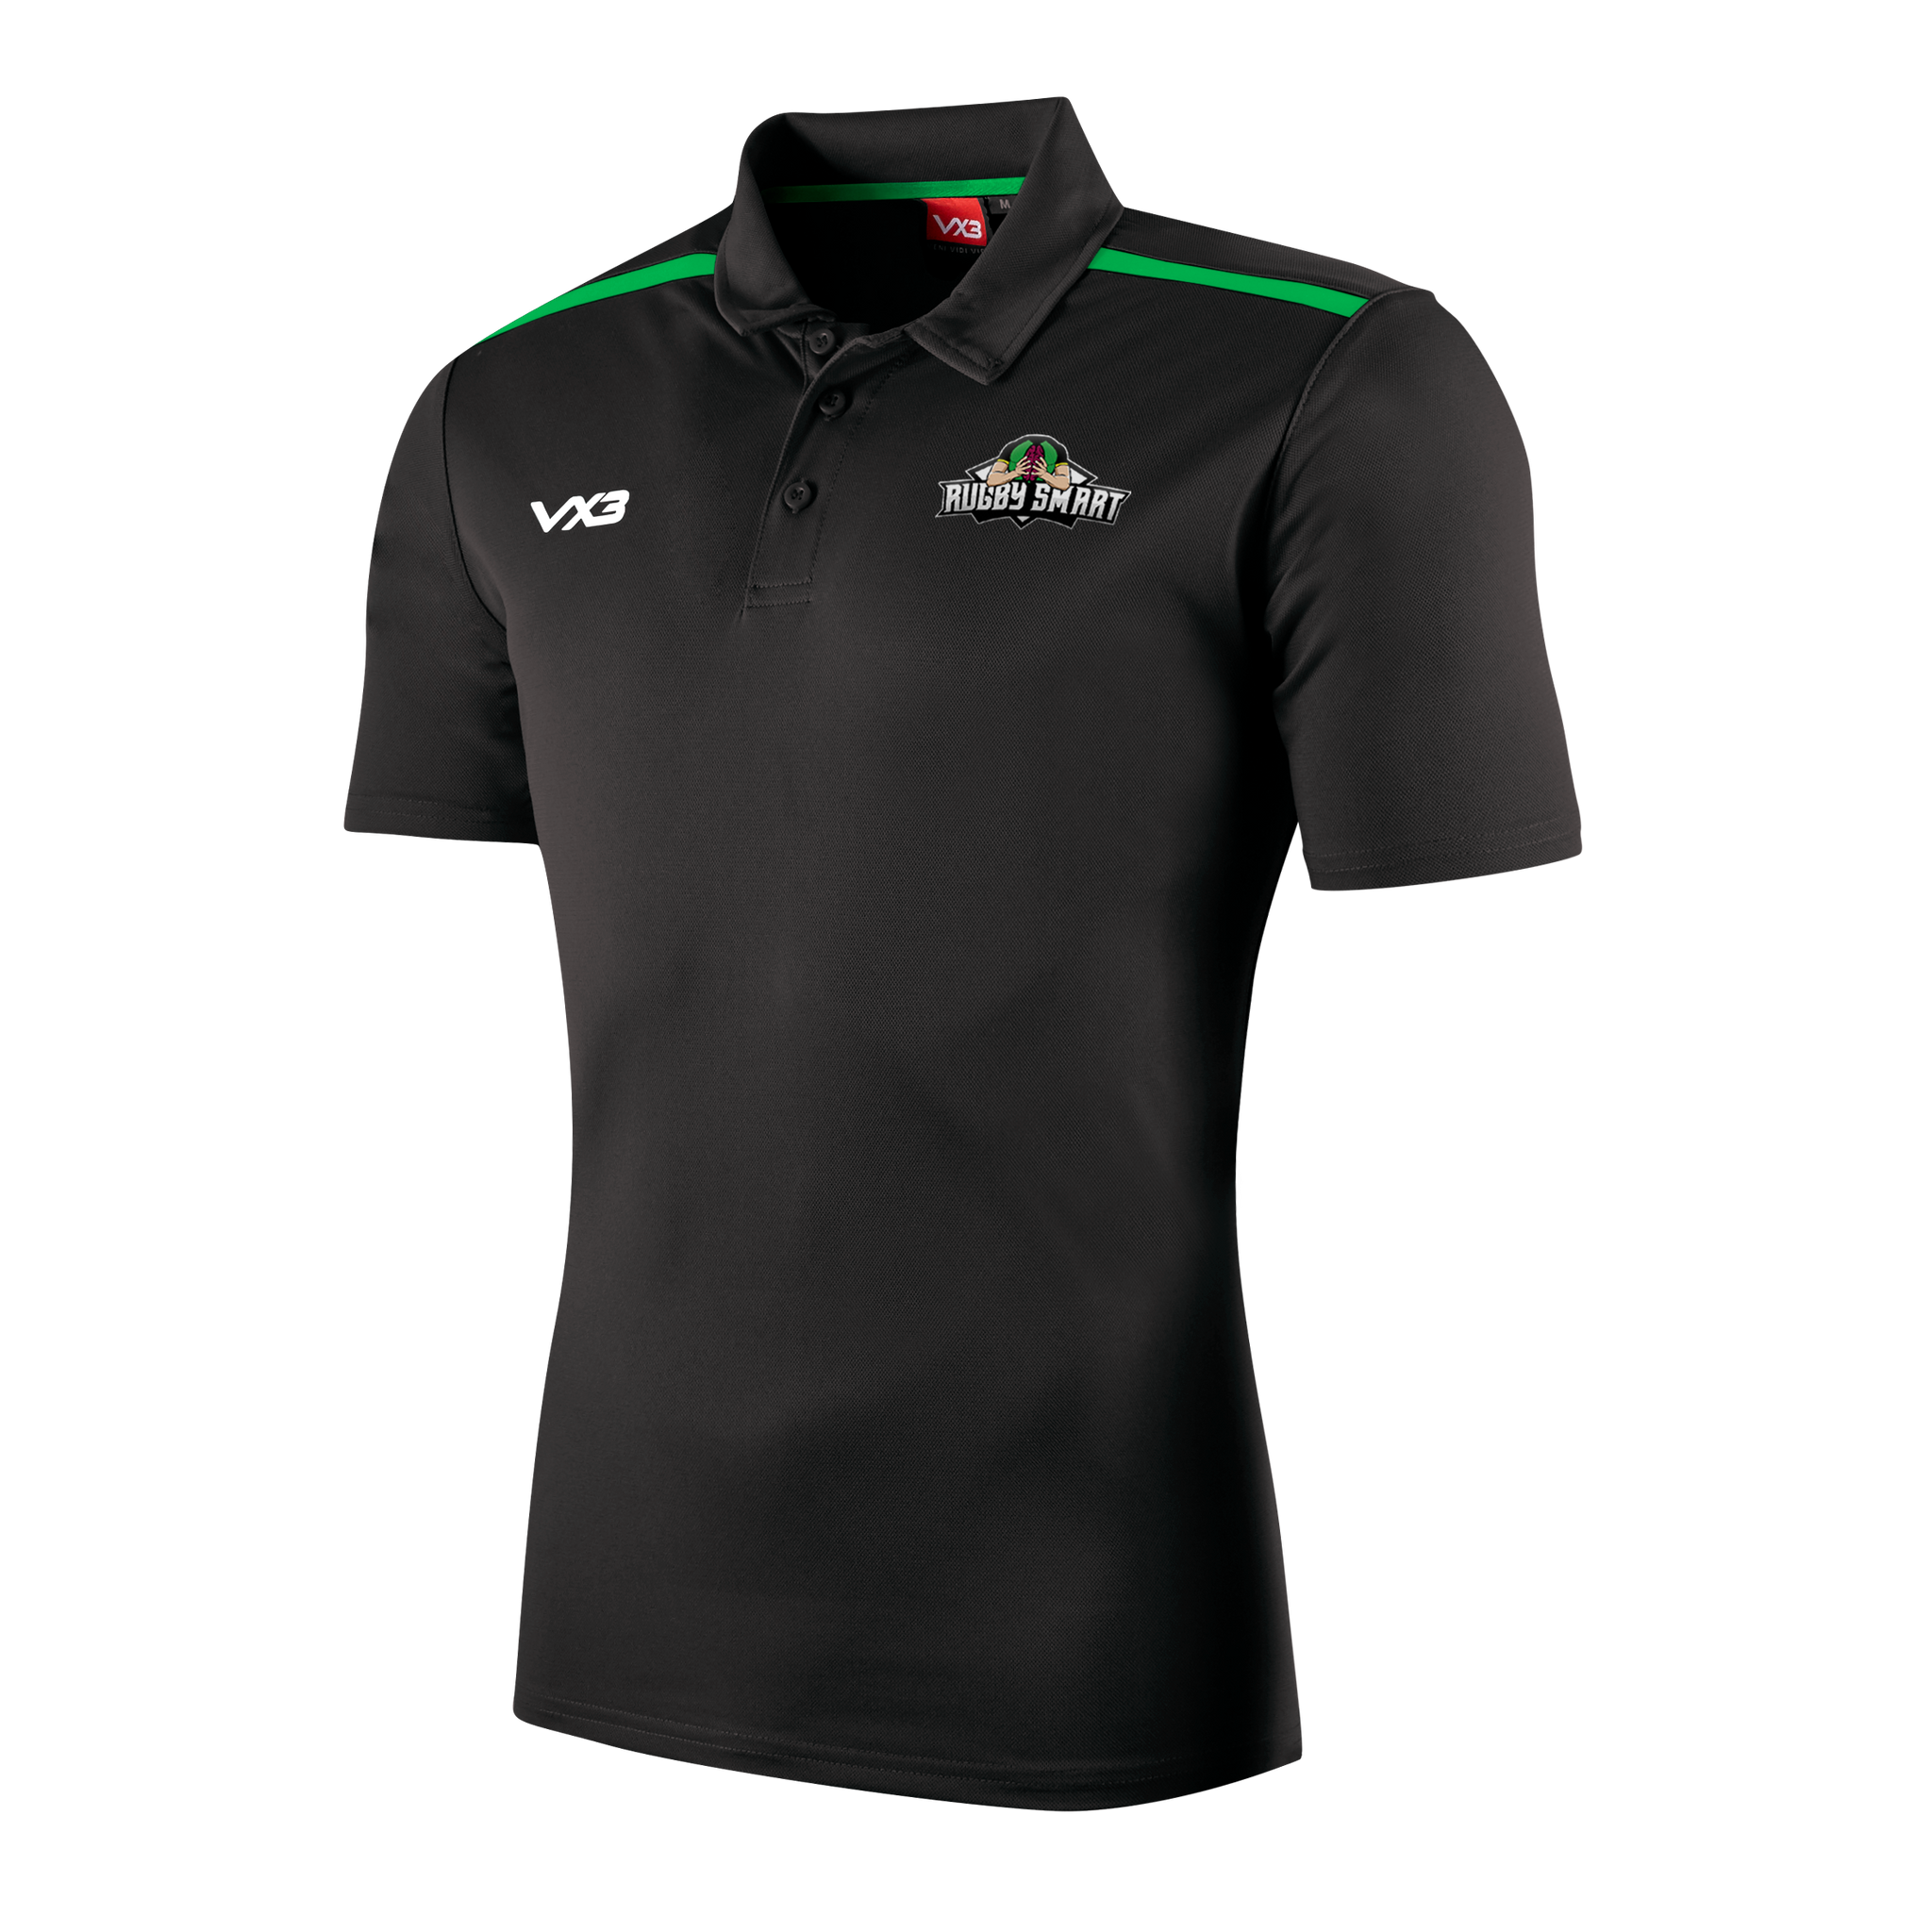 Rugby Smart Fortis Youth Polo